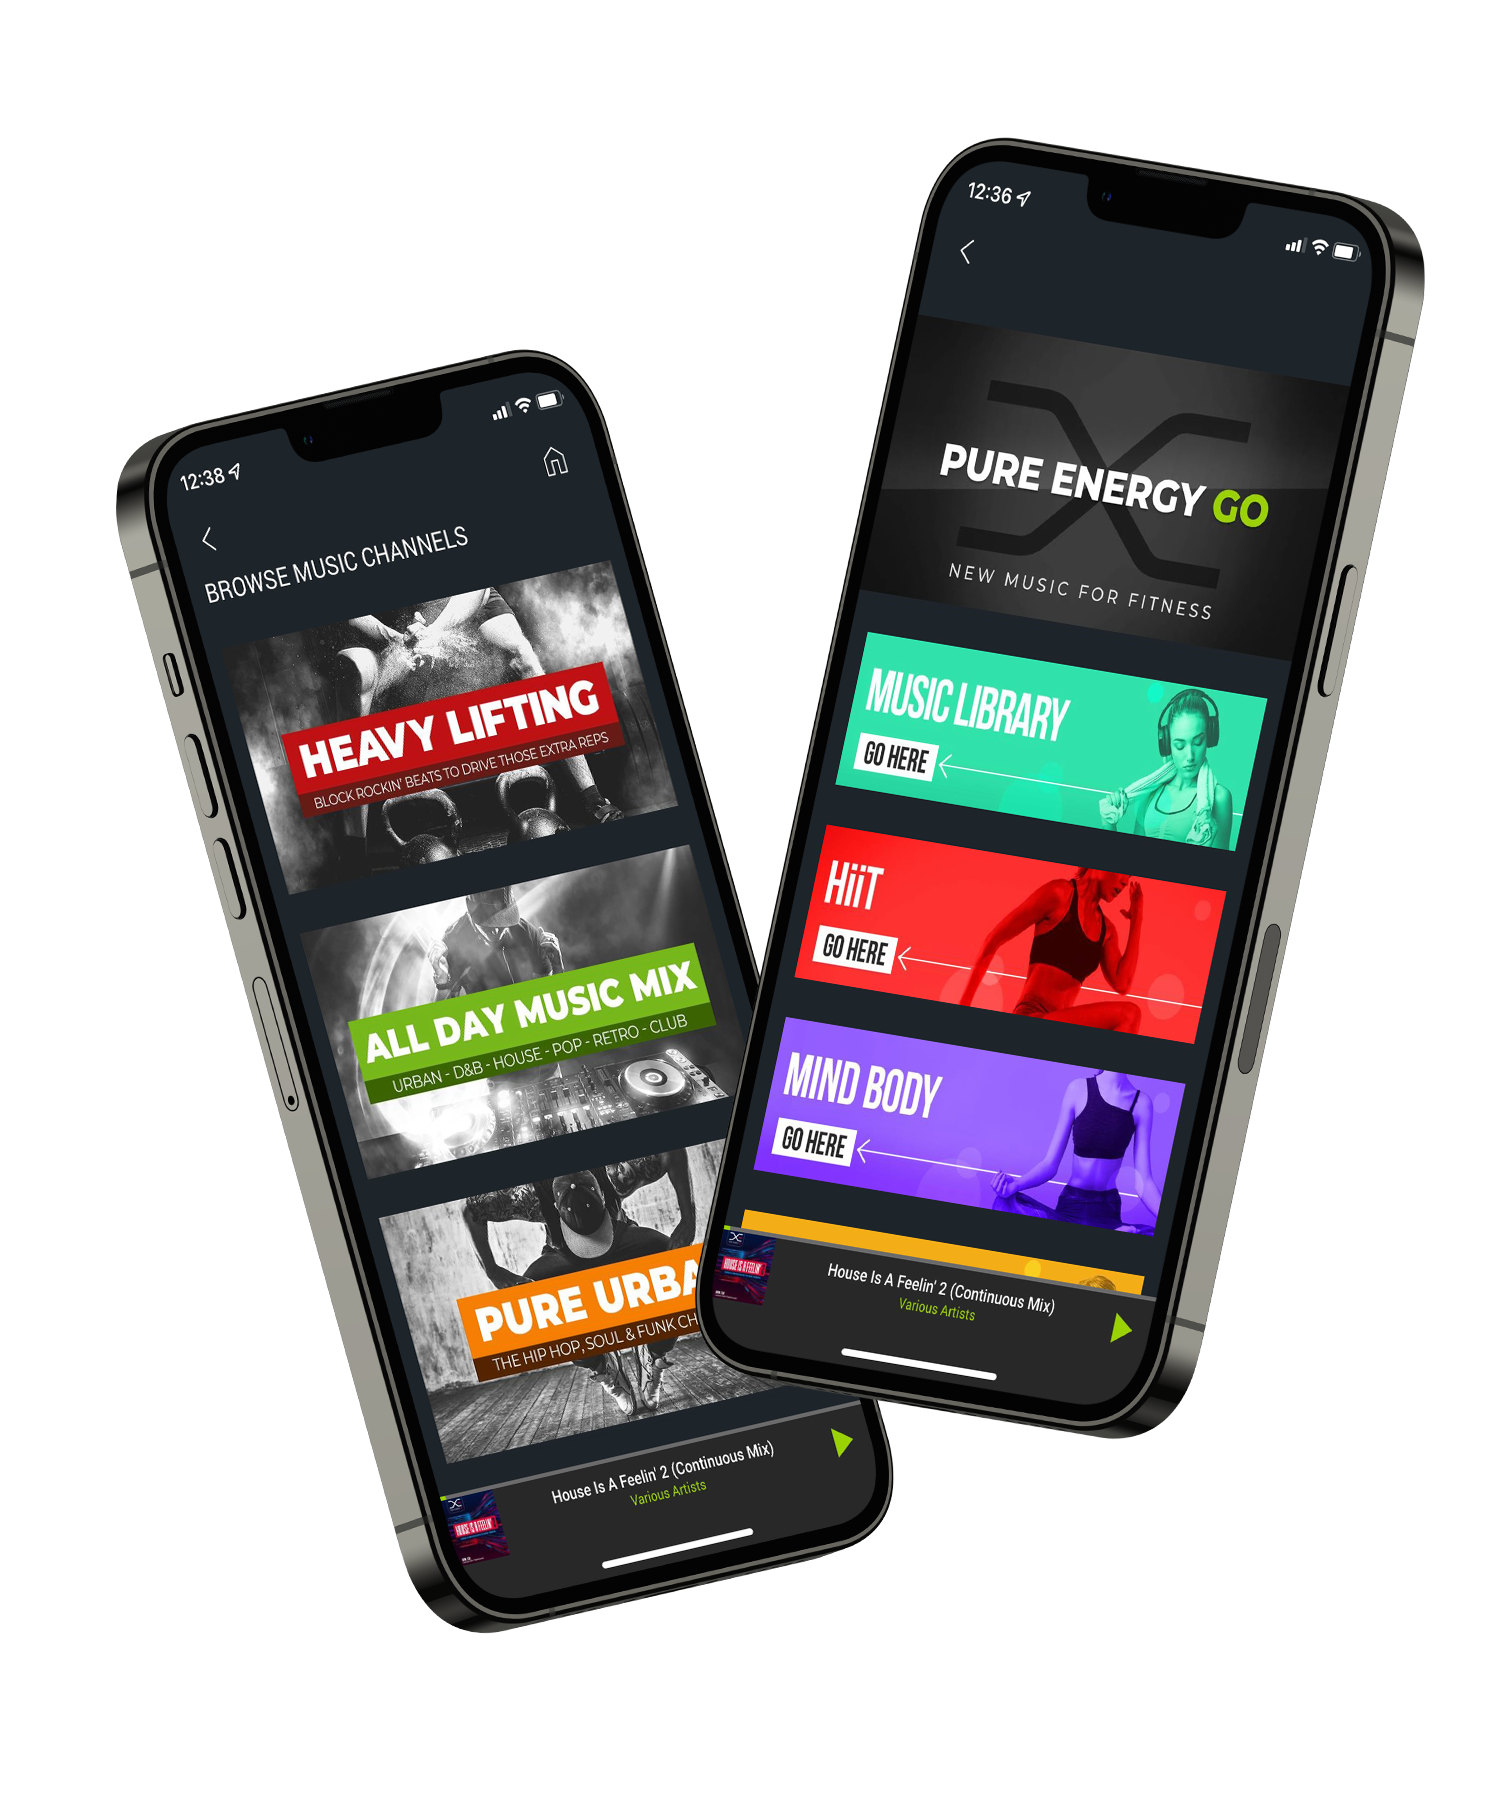 image of 2 smart phones showing the Pure Energy GO gym music app